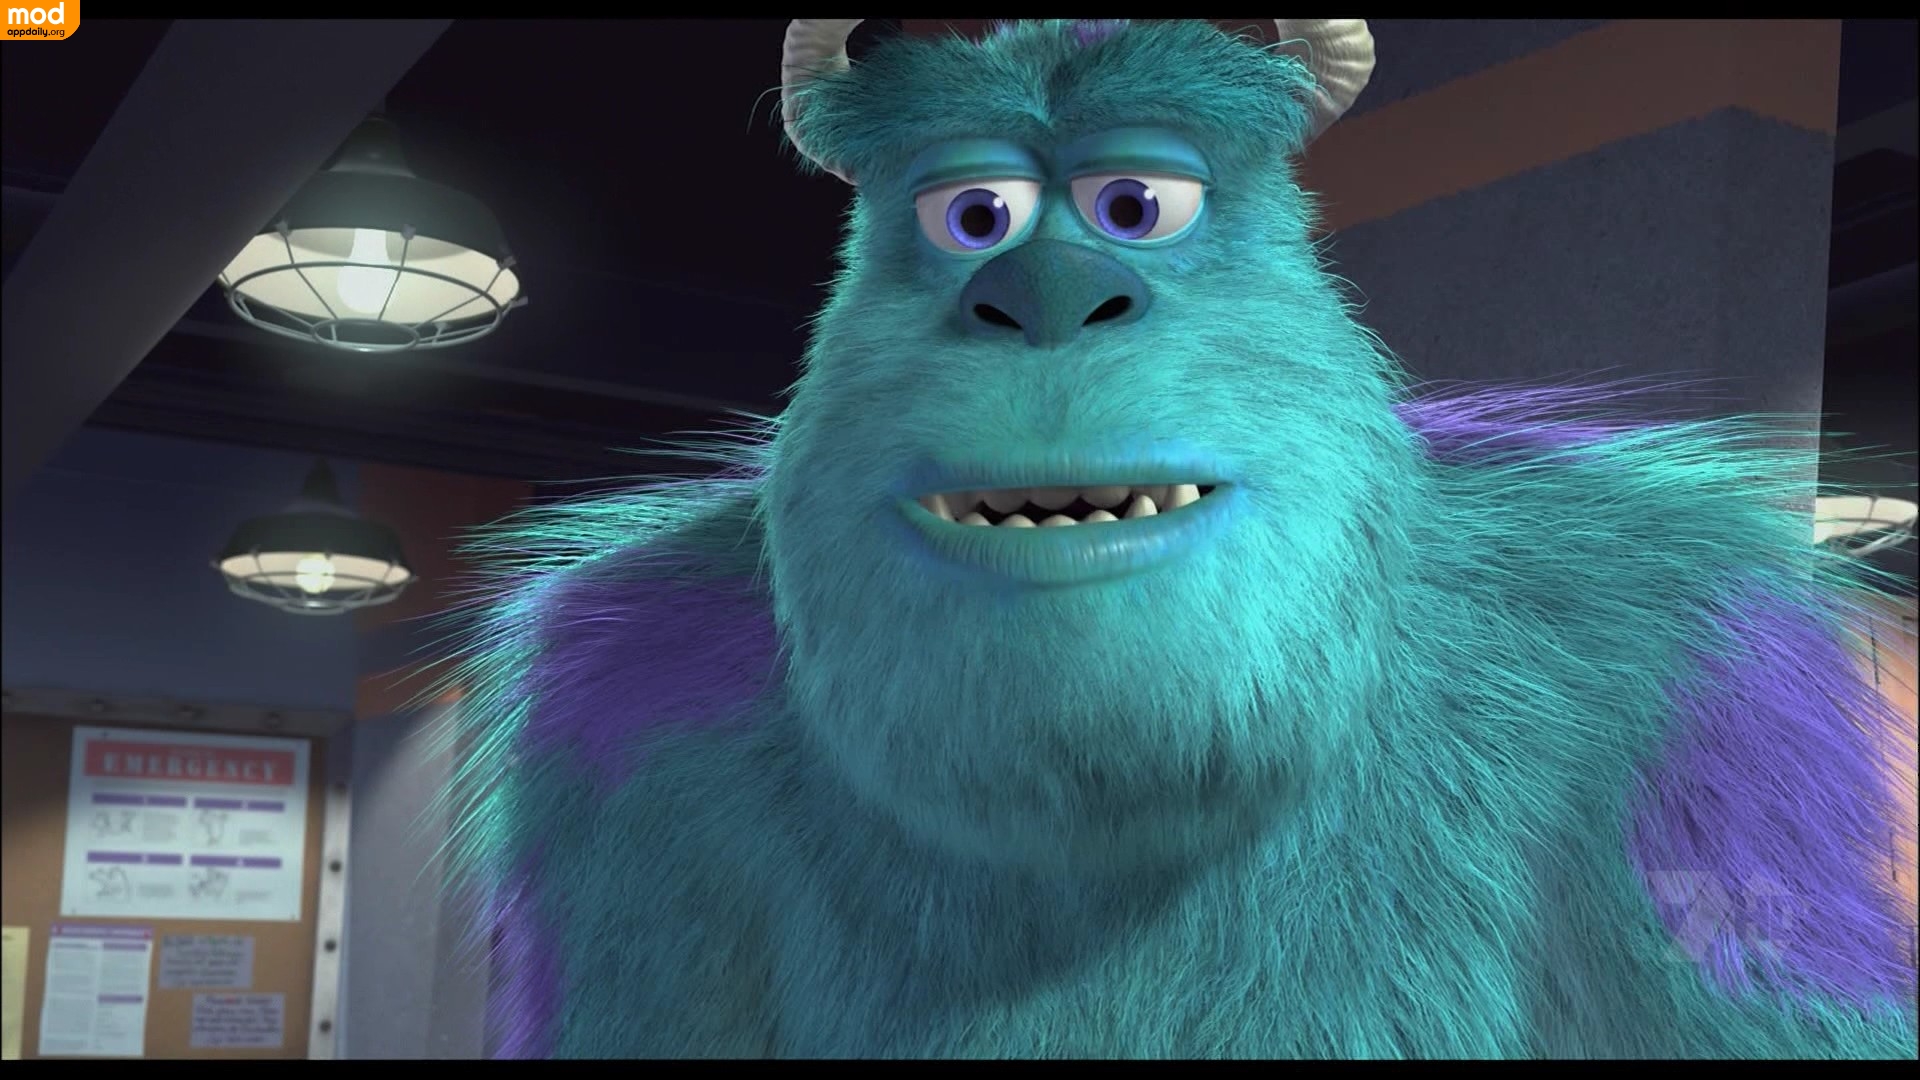 However, Mike's inadvertent remark and an earlier observation led Sullivan - Blue Monster from Monsters Inc discover that laughing is 10 times more potent than screaming in humans